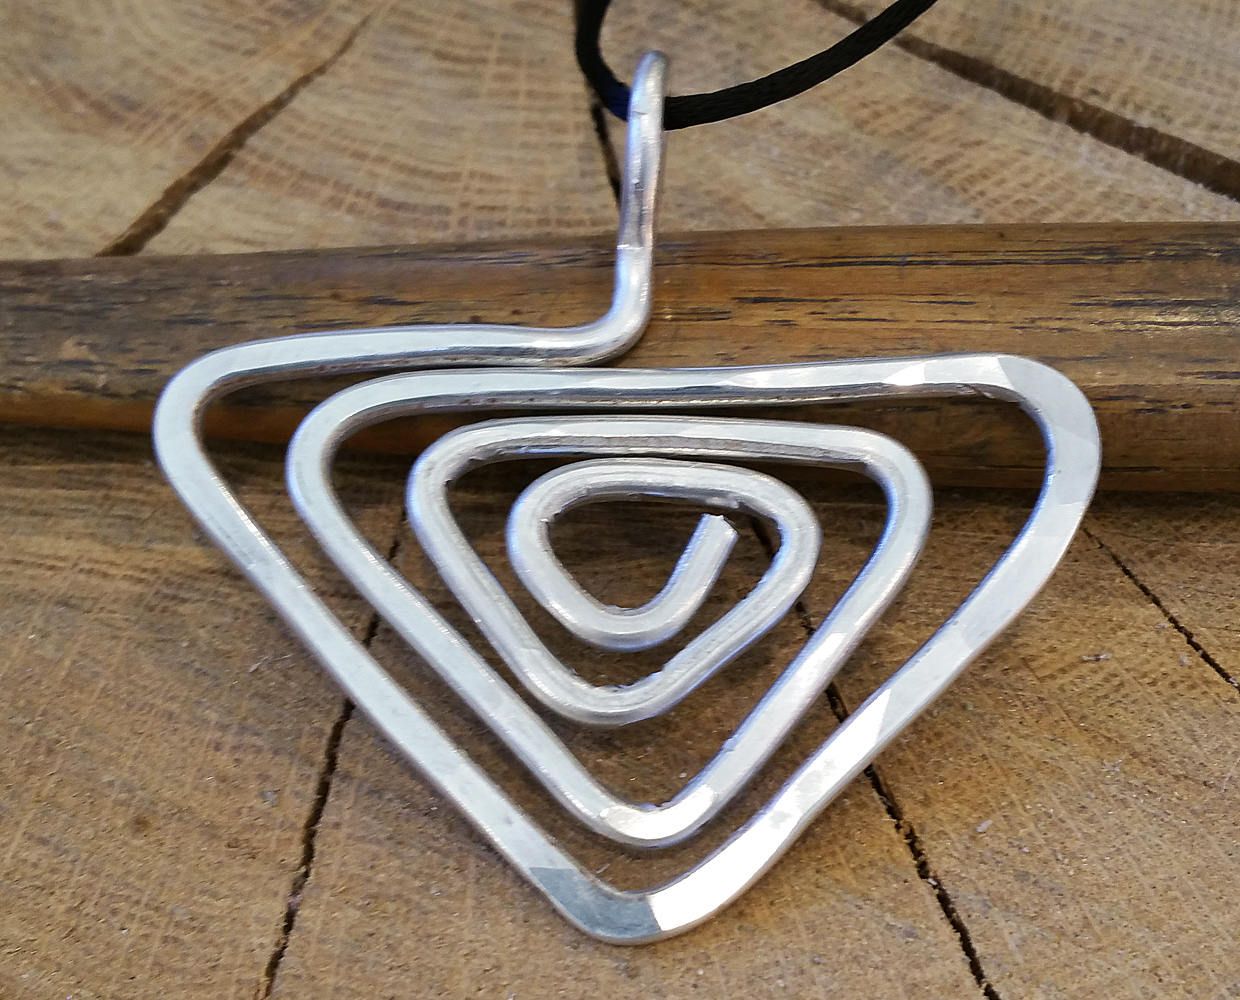 Fashionable Triangle Spiral Big Pendant, Large Triangle Necklace Light Weight Aluminum  Geometric Statement Necklace Gift For Her Women Boho Jewelry With Regard To 1 Light Unique / Statement Geometric Pendants (View 20 of 25)